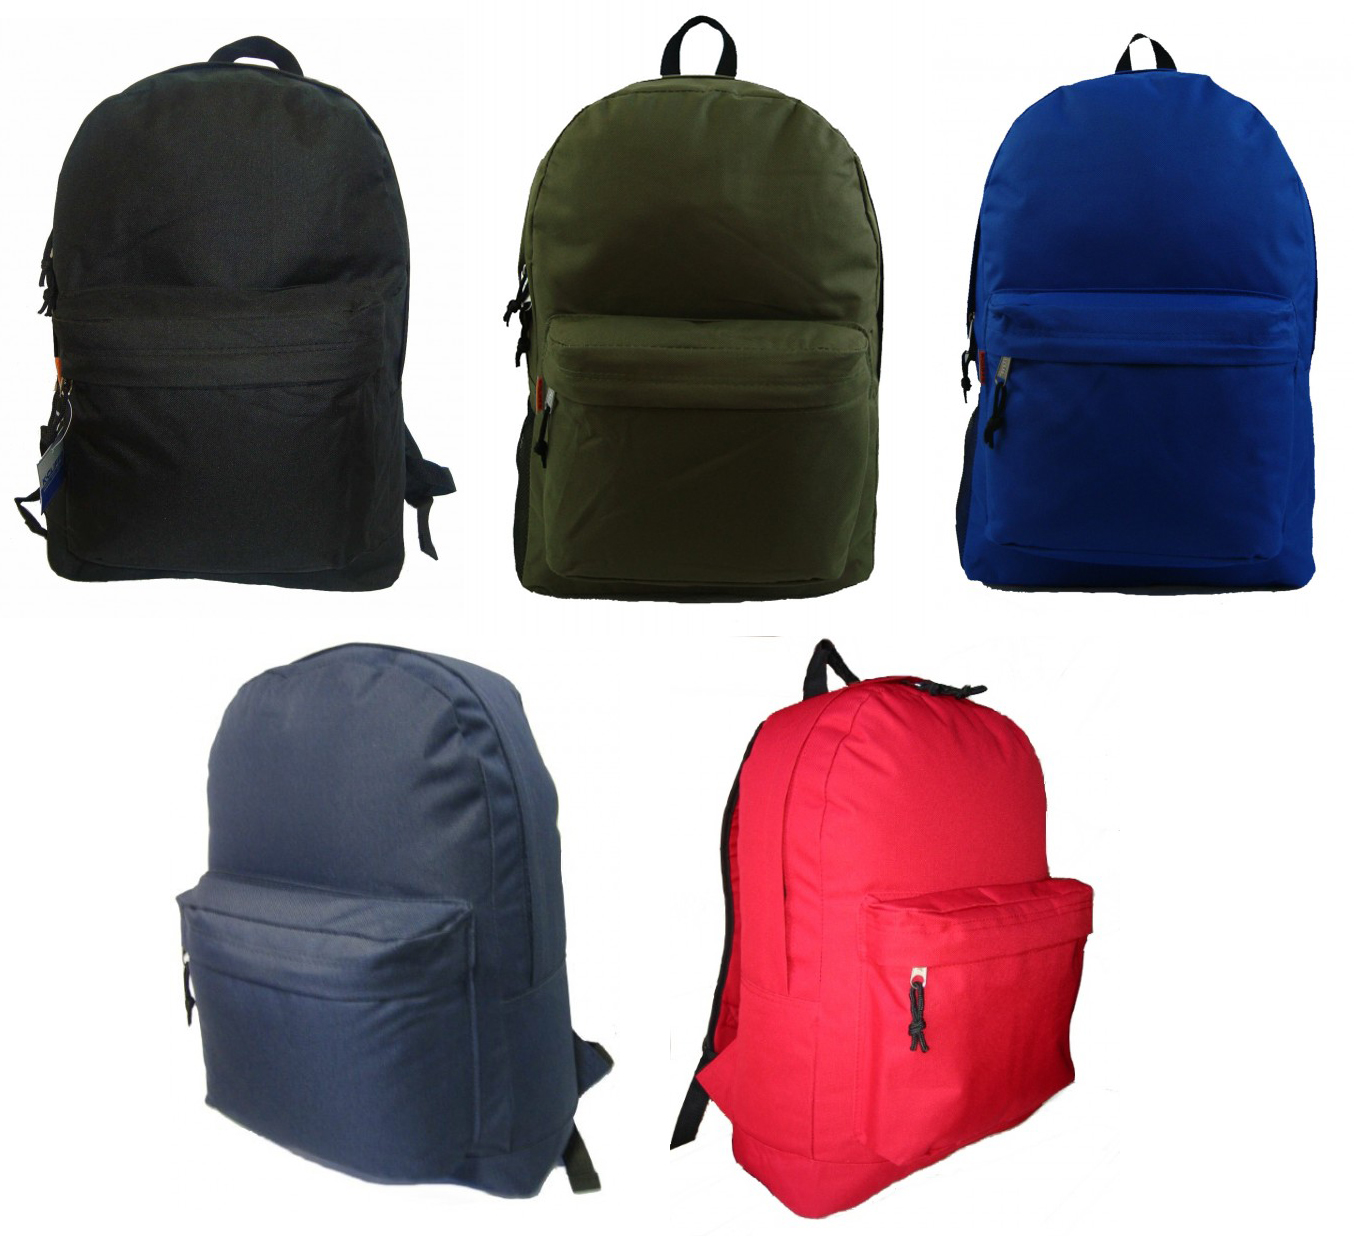 ''18'''' Padded BACKPACKs - Choose Your Color(s)''